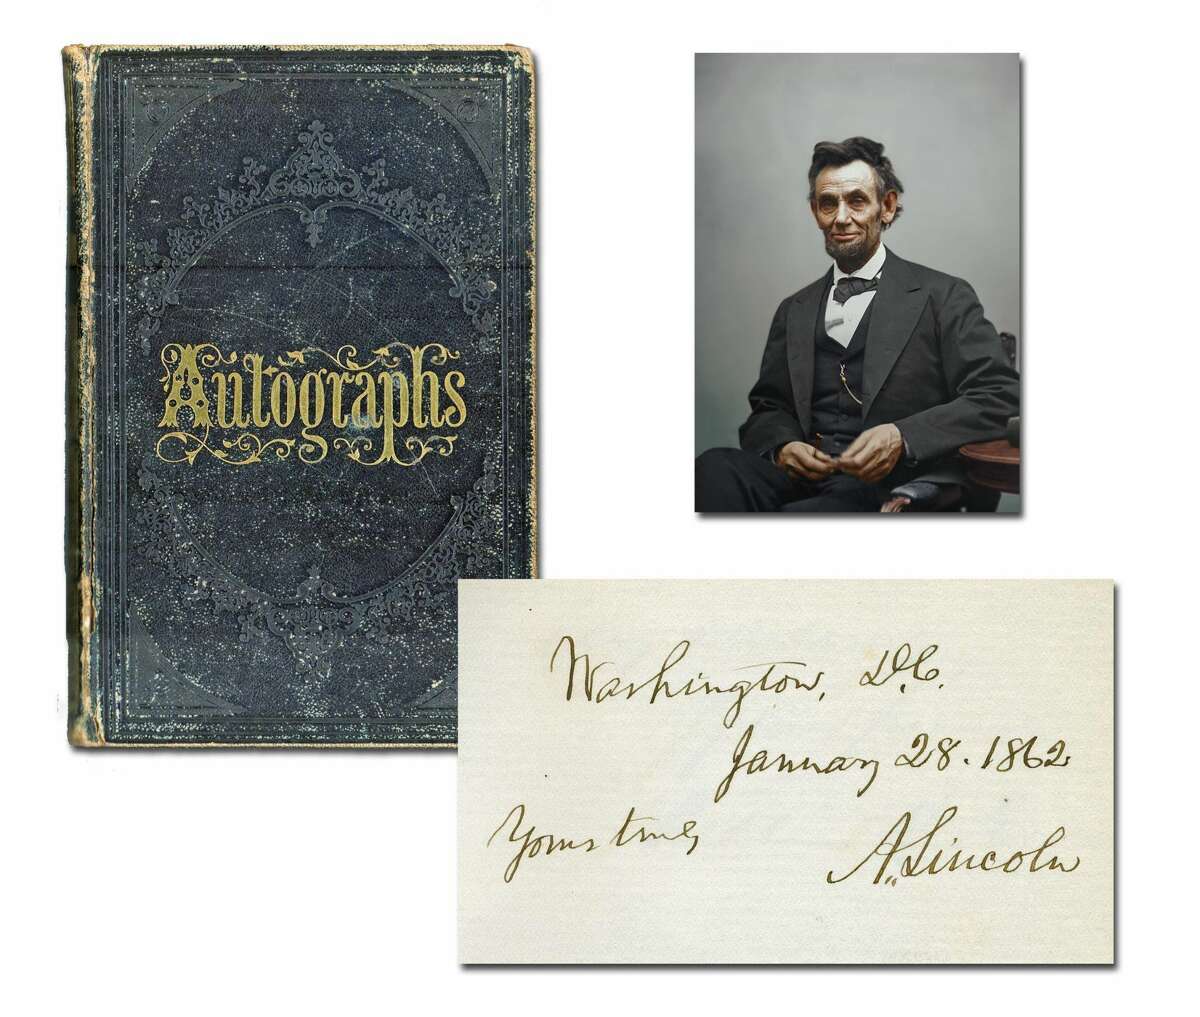 Victorian autograph album containing the signature of Abraham Lincoln and 226 members of his administration and Congress, including future President Andrew Johnson.